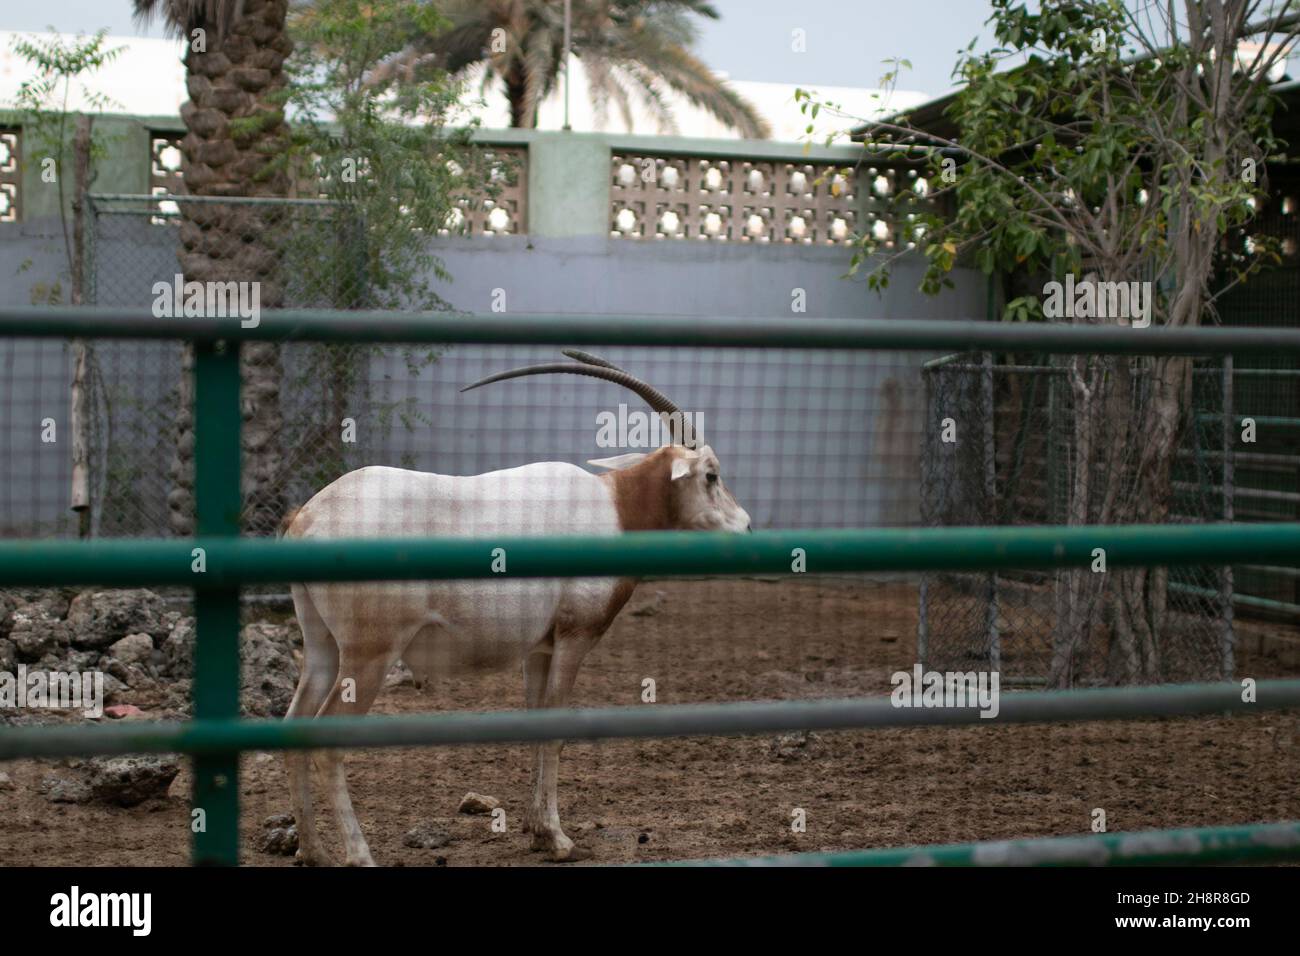 Wild animal scimitar oryx in a zoo cage Stock Photo